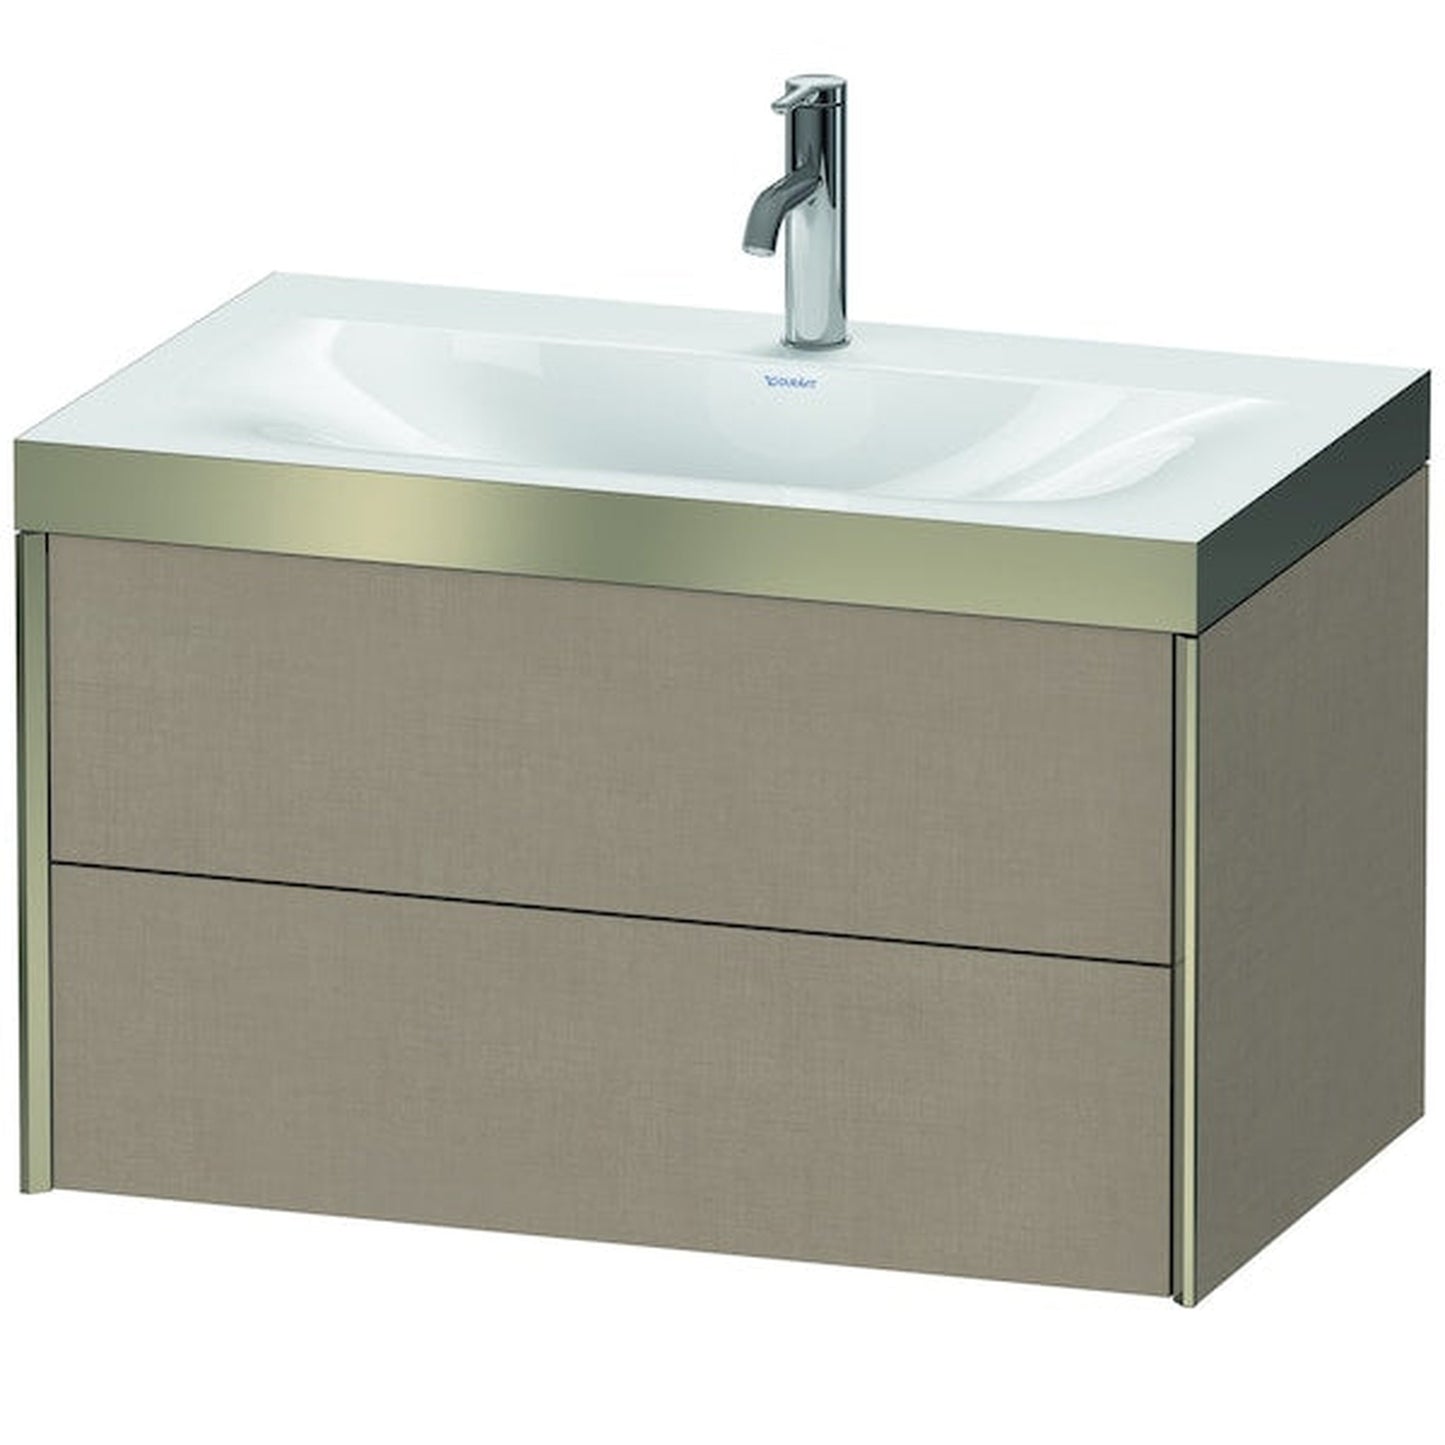 Duravit Xviu 31" x 20" x 19" Two Drawer C-Bonded Wall-Mount Vanity Kit With One Tap Hole, Linen (XV4615OB175P)